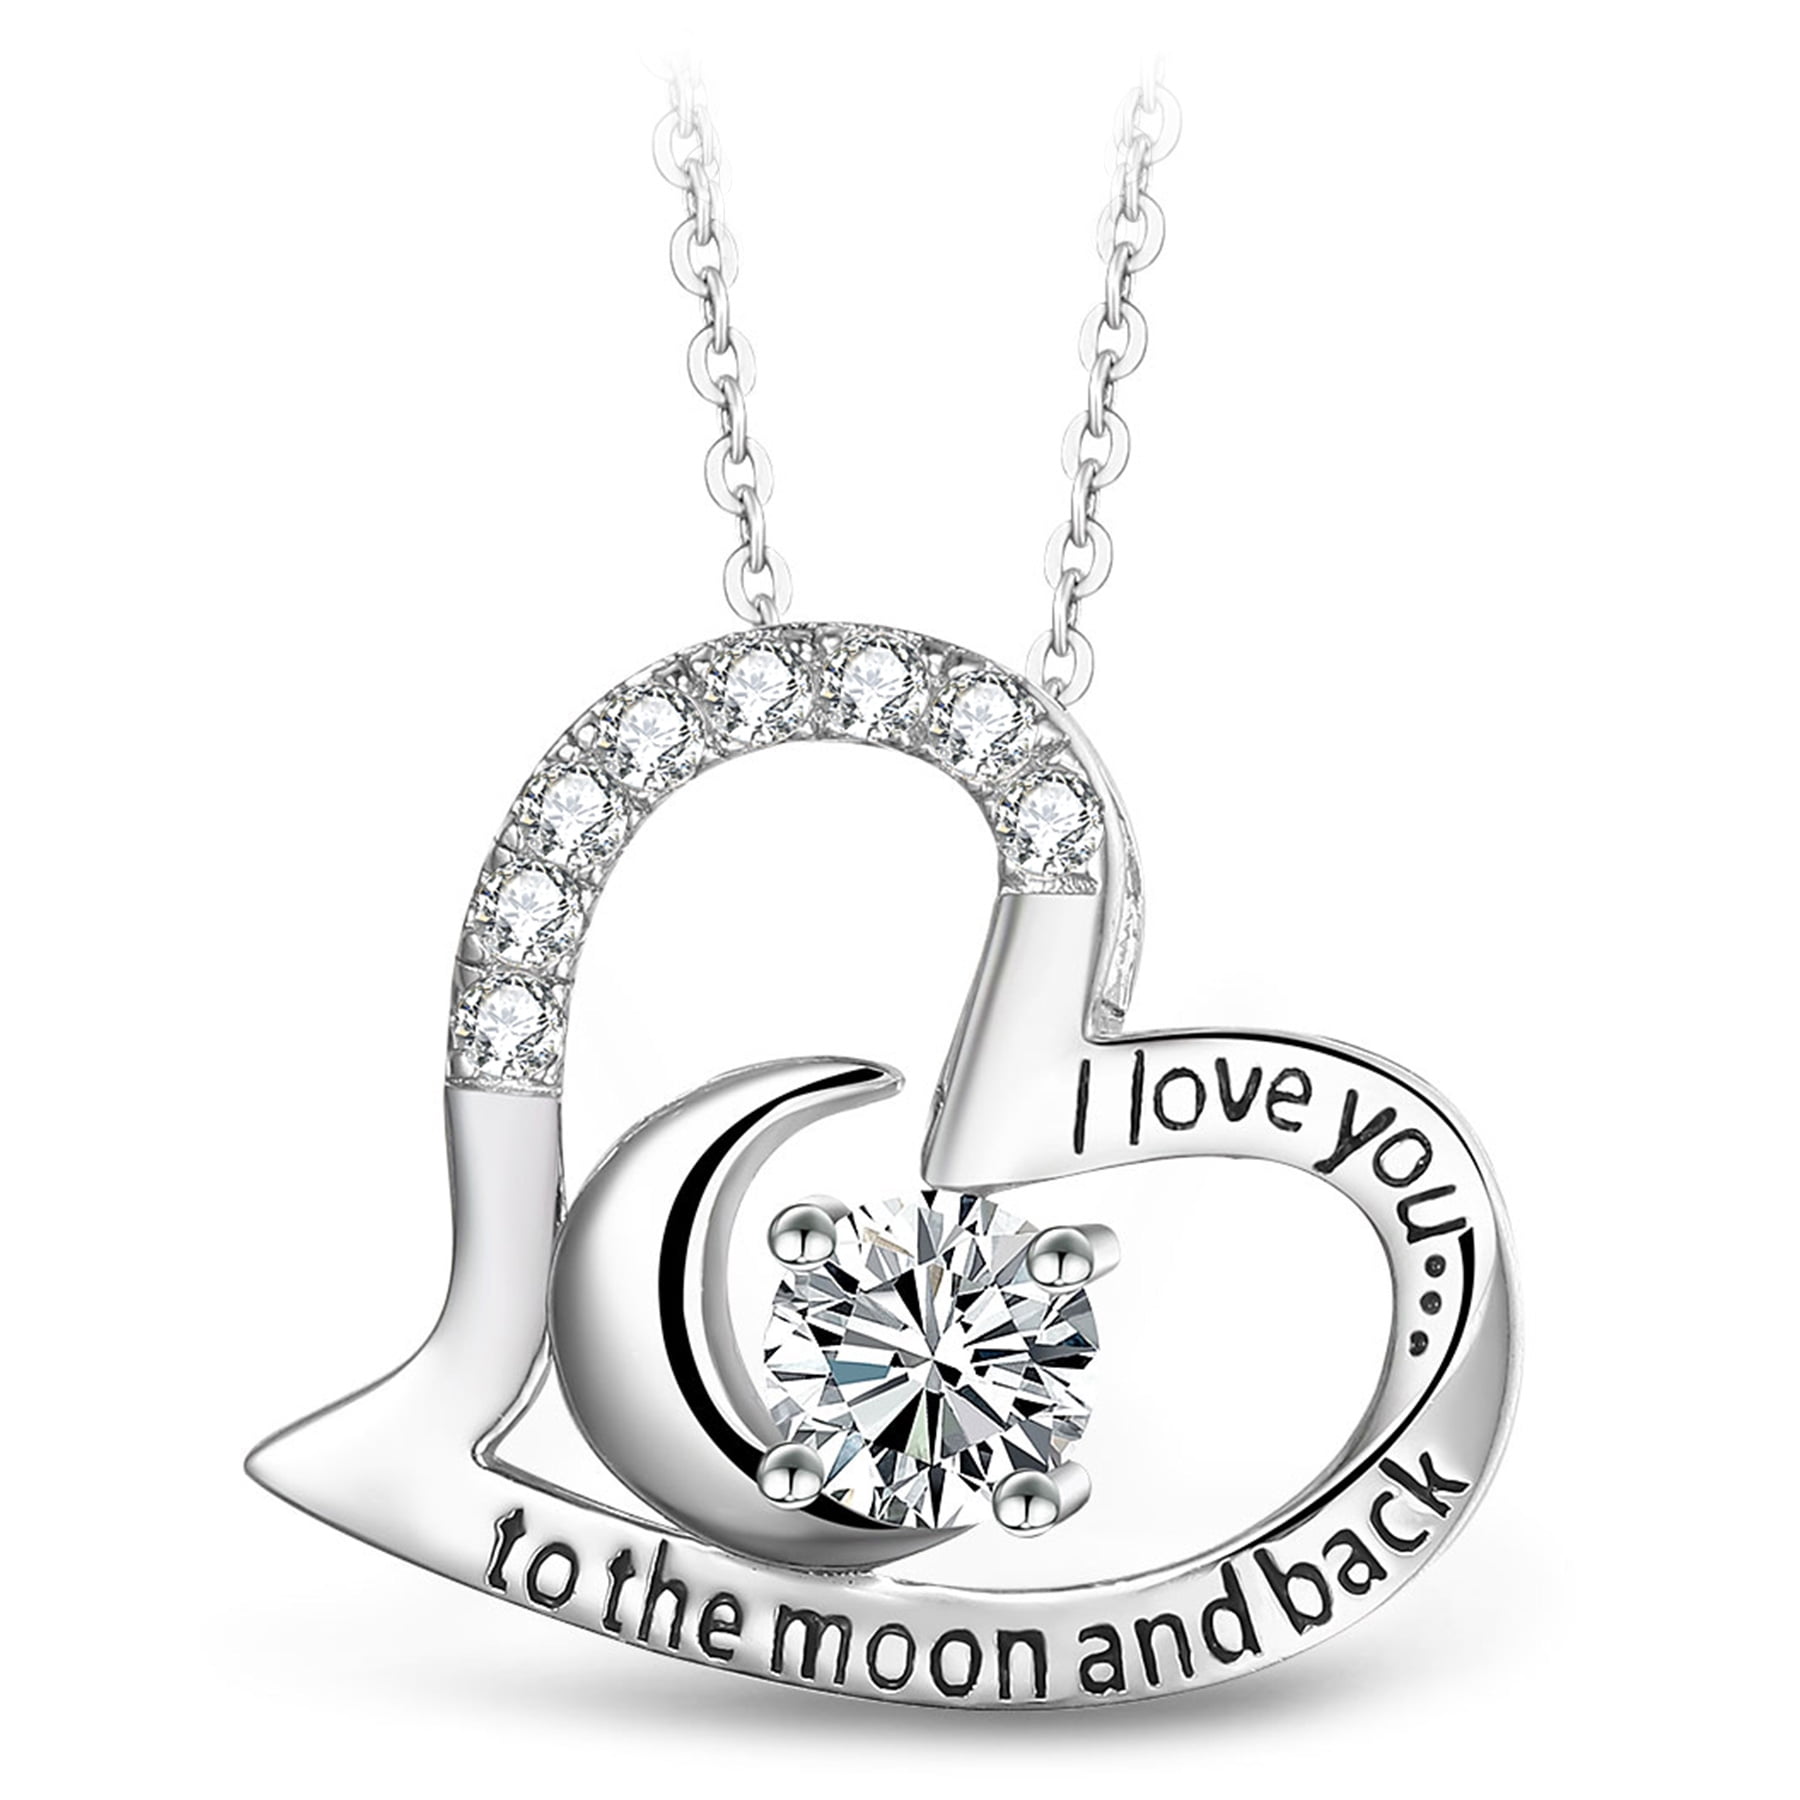 Honolulu Jewelry Company Sterling Silver I Love You 2 The Moon & Back Moon with Hanging CZ Heart Necklace Pendant and 18 Box Chain 